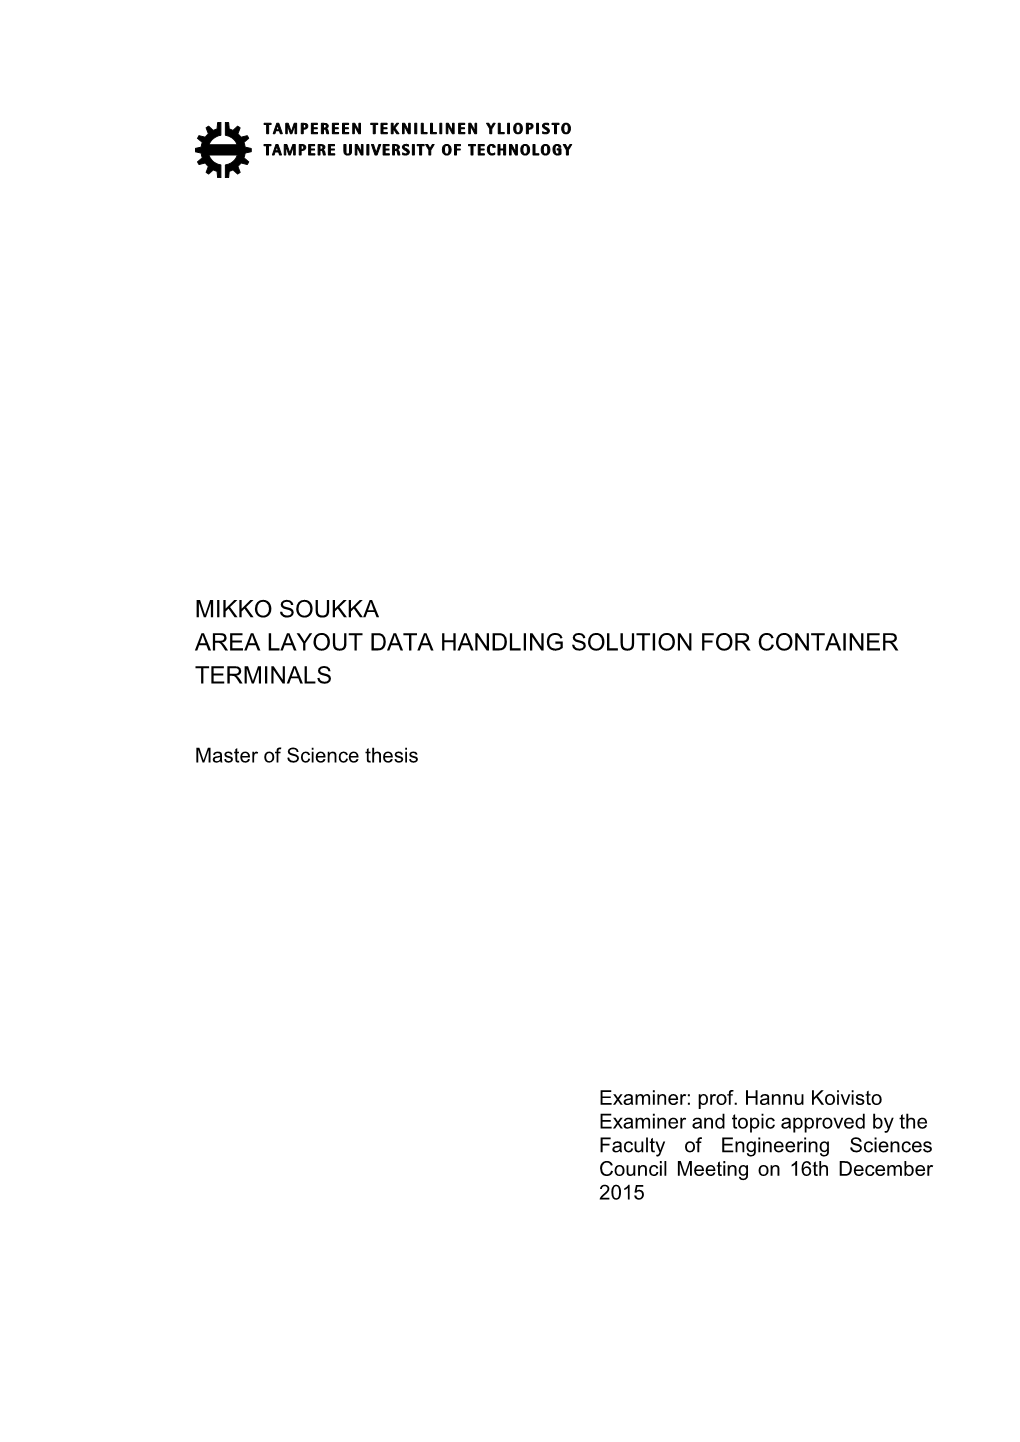 Mikko Soukka Area Layout Data Handling Solution for Container Terminals